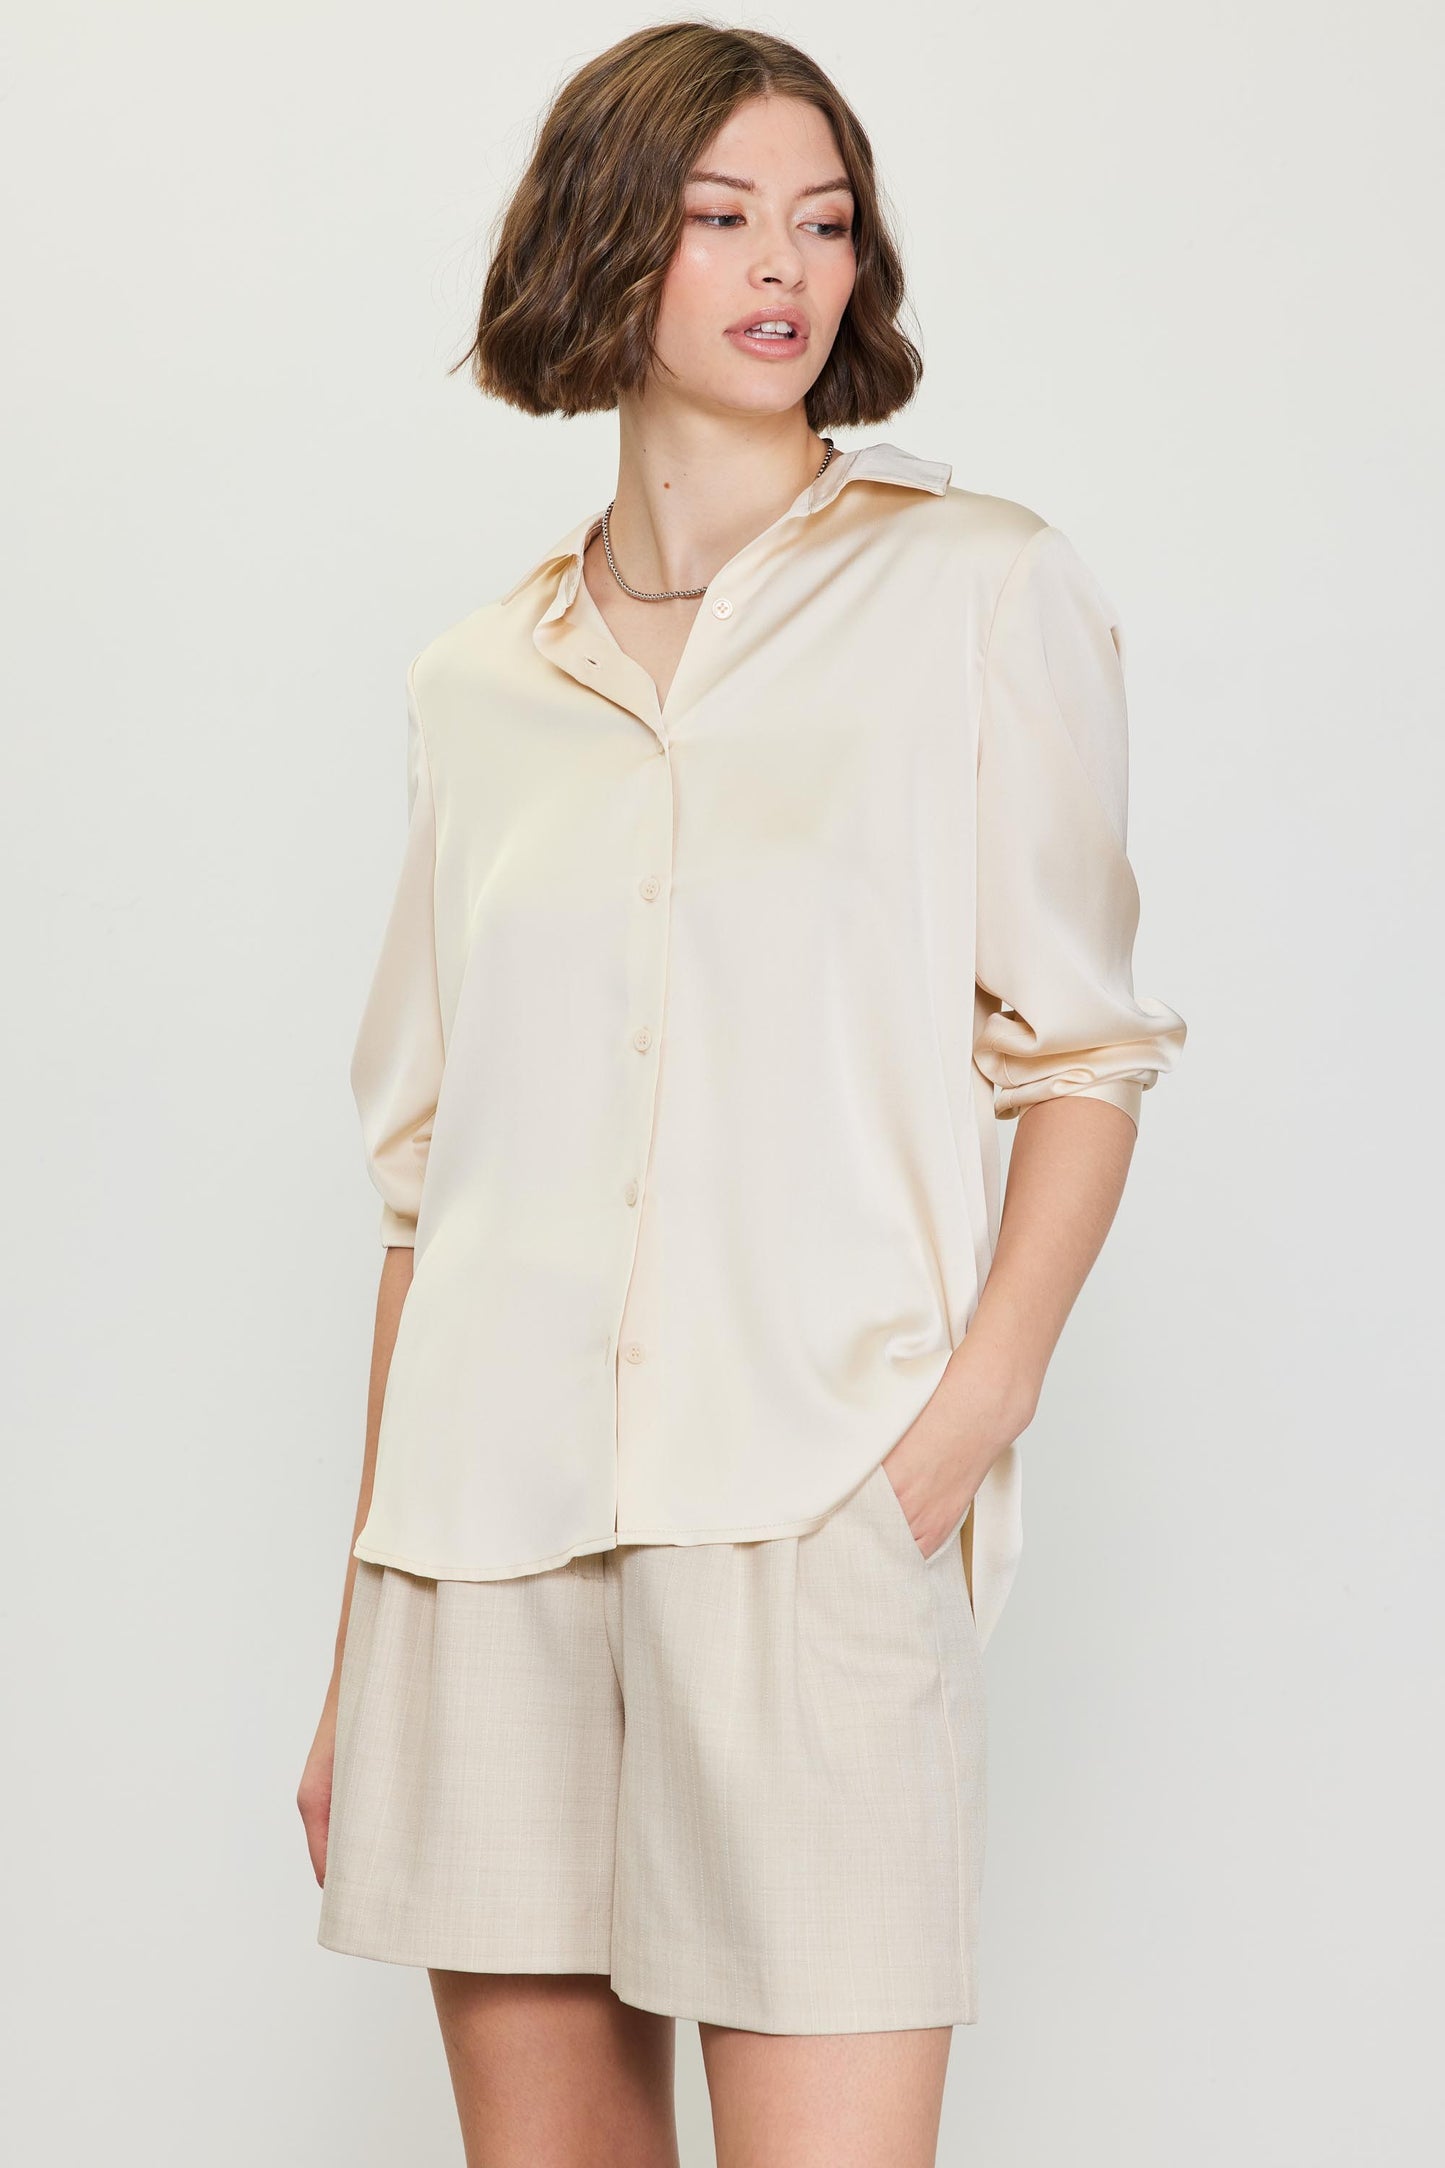 Satin Classic Button Down Blouse - Shell-Shirts & Tops- Hometown Style HTS, women's in store and online boutique located in Ingersoll, Ontario